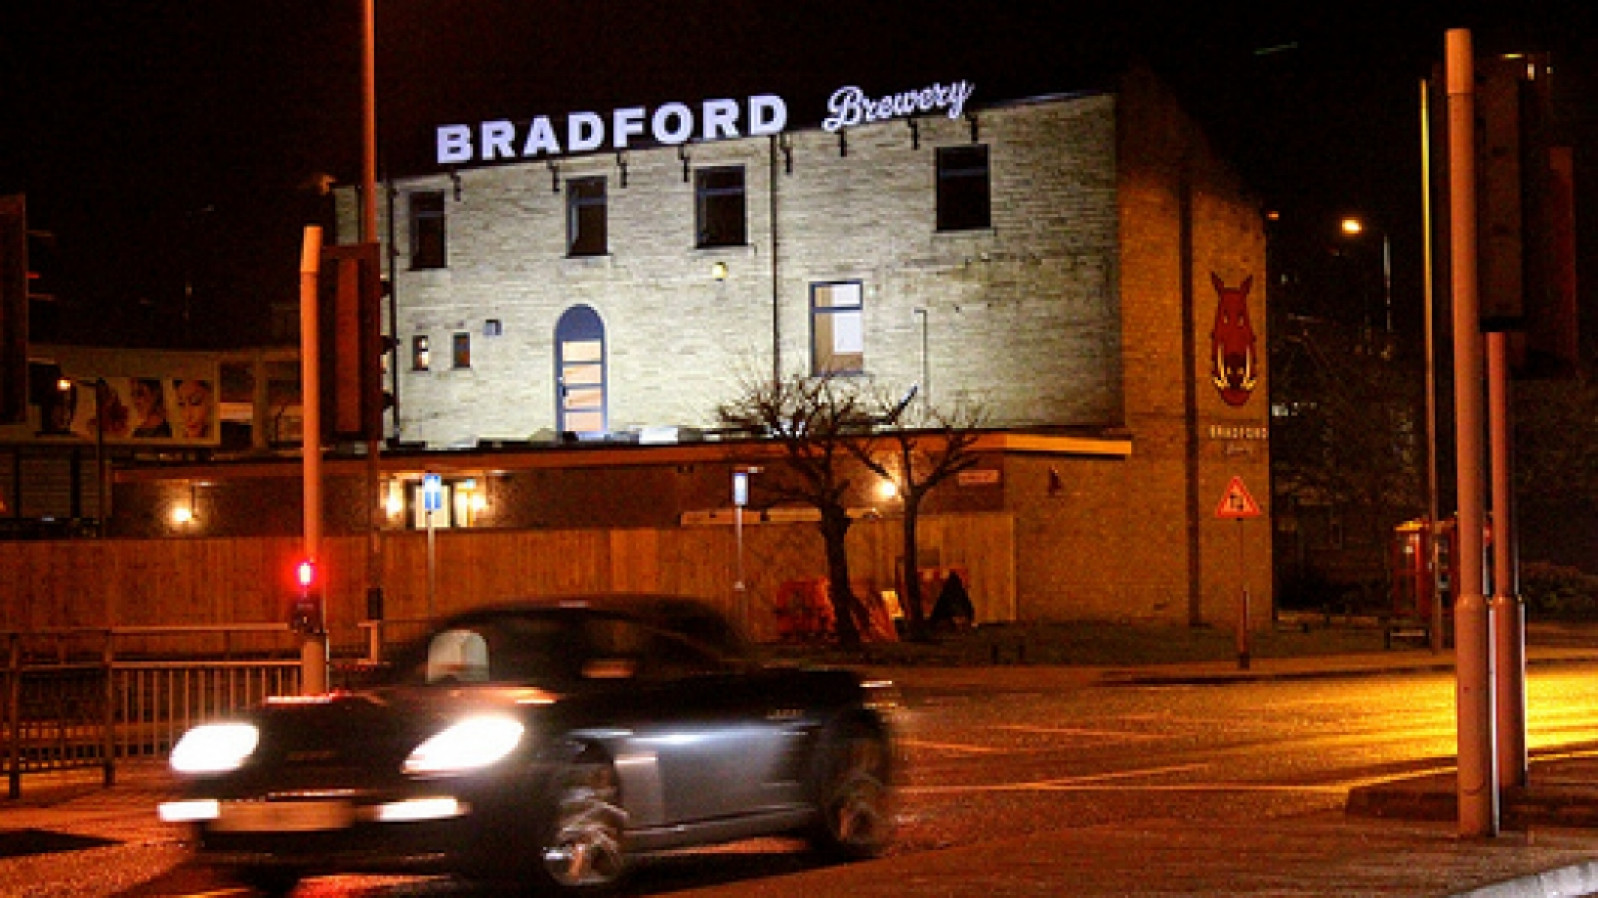 Bradford Brewery preview upcoming Networking event